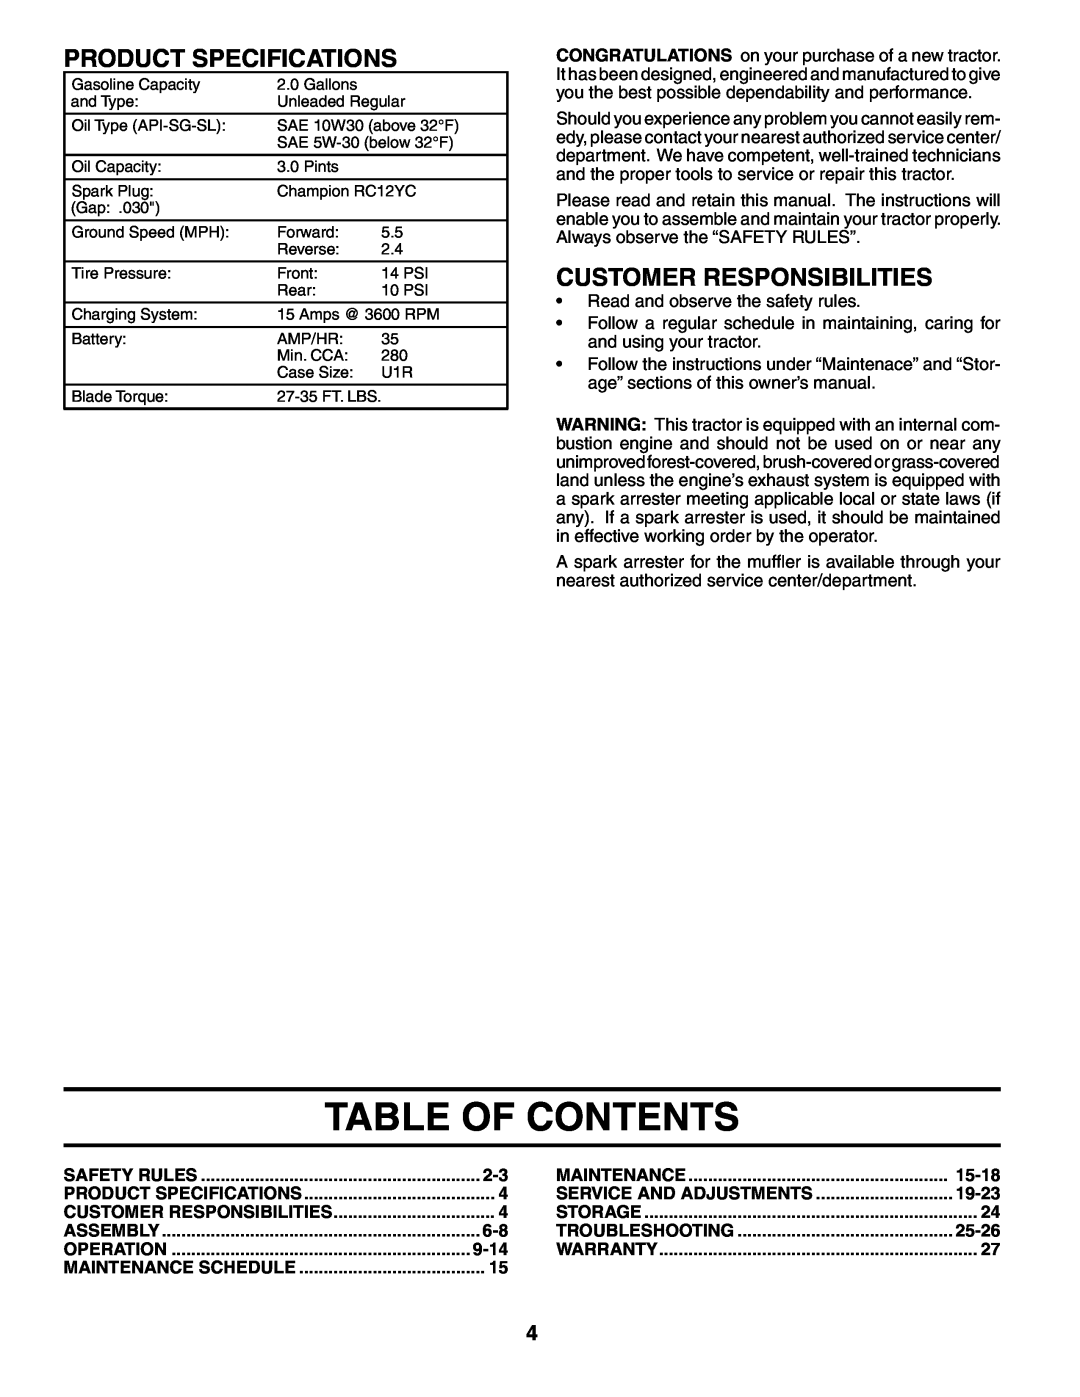 Ryobi 197788 manual Table Of Contents, Product Specifications, Customer Responsibilities 